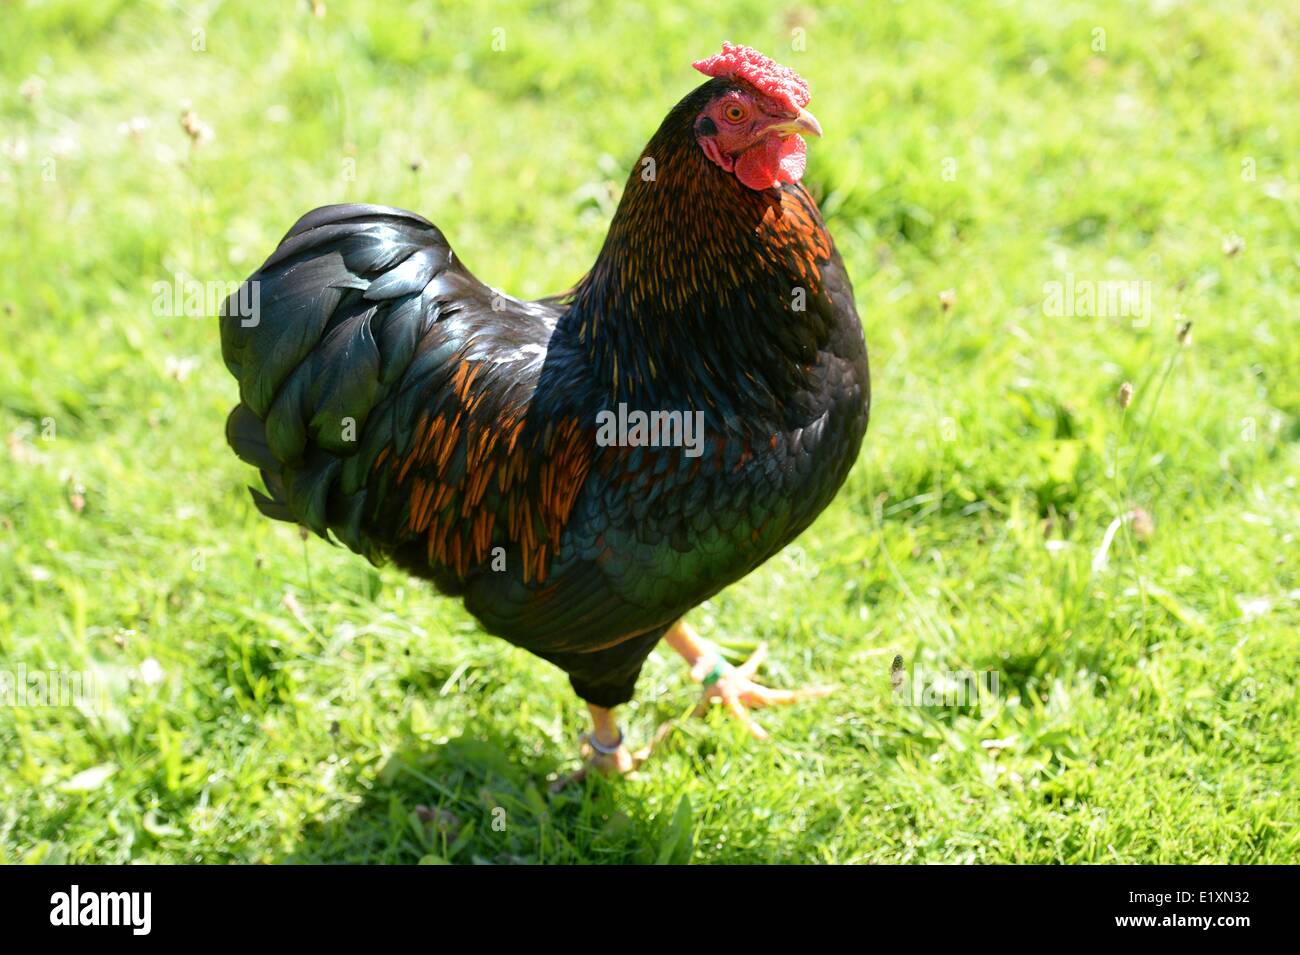 A hen in a garden in germany, 06. June 2014. Photo: Frank May Stock Photo